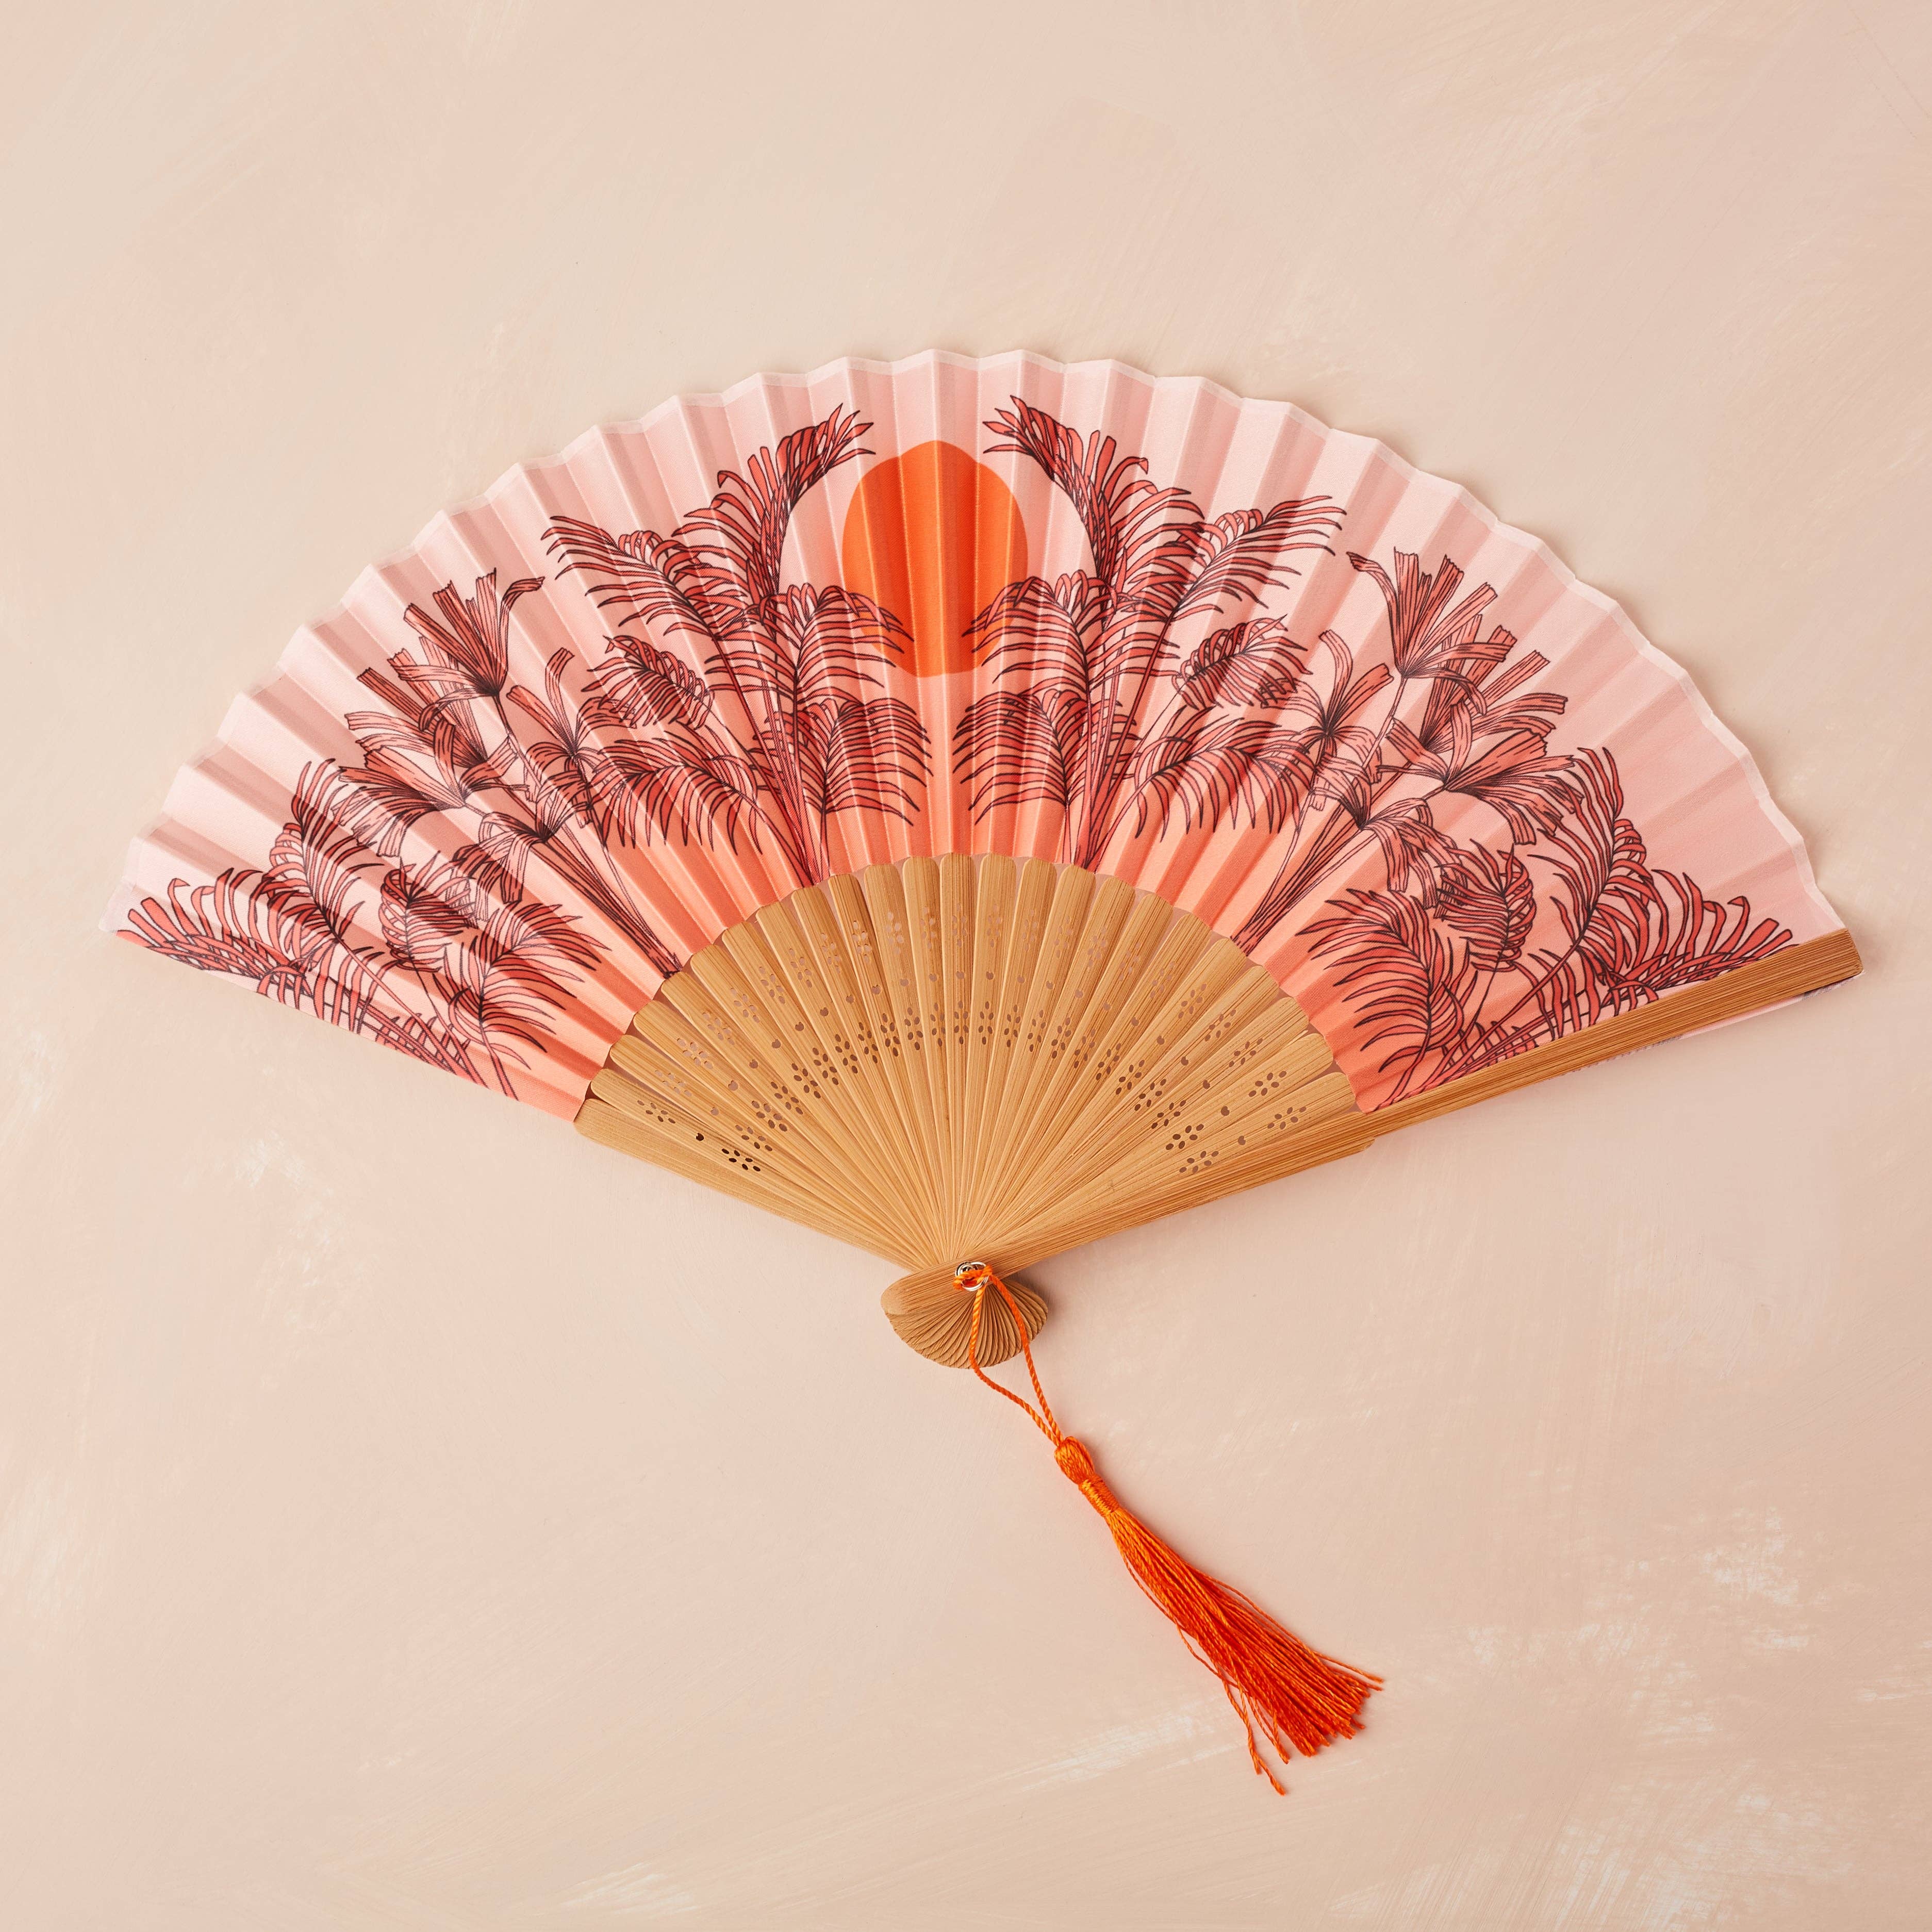 Small Folding Fan in Peachy Orange - Out of the Blue